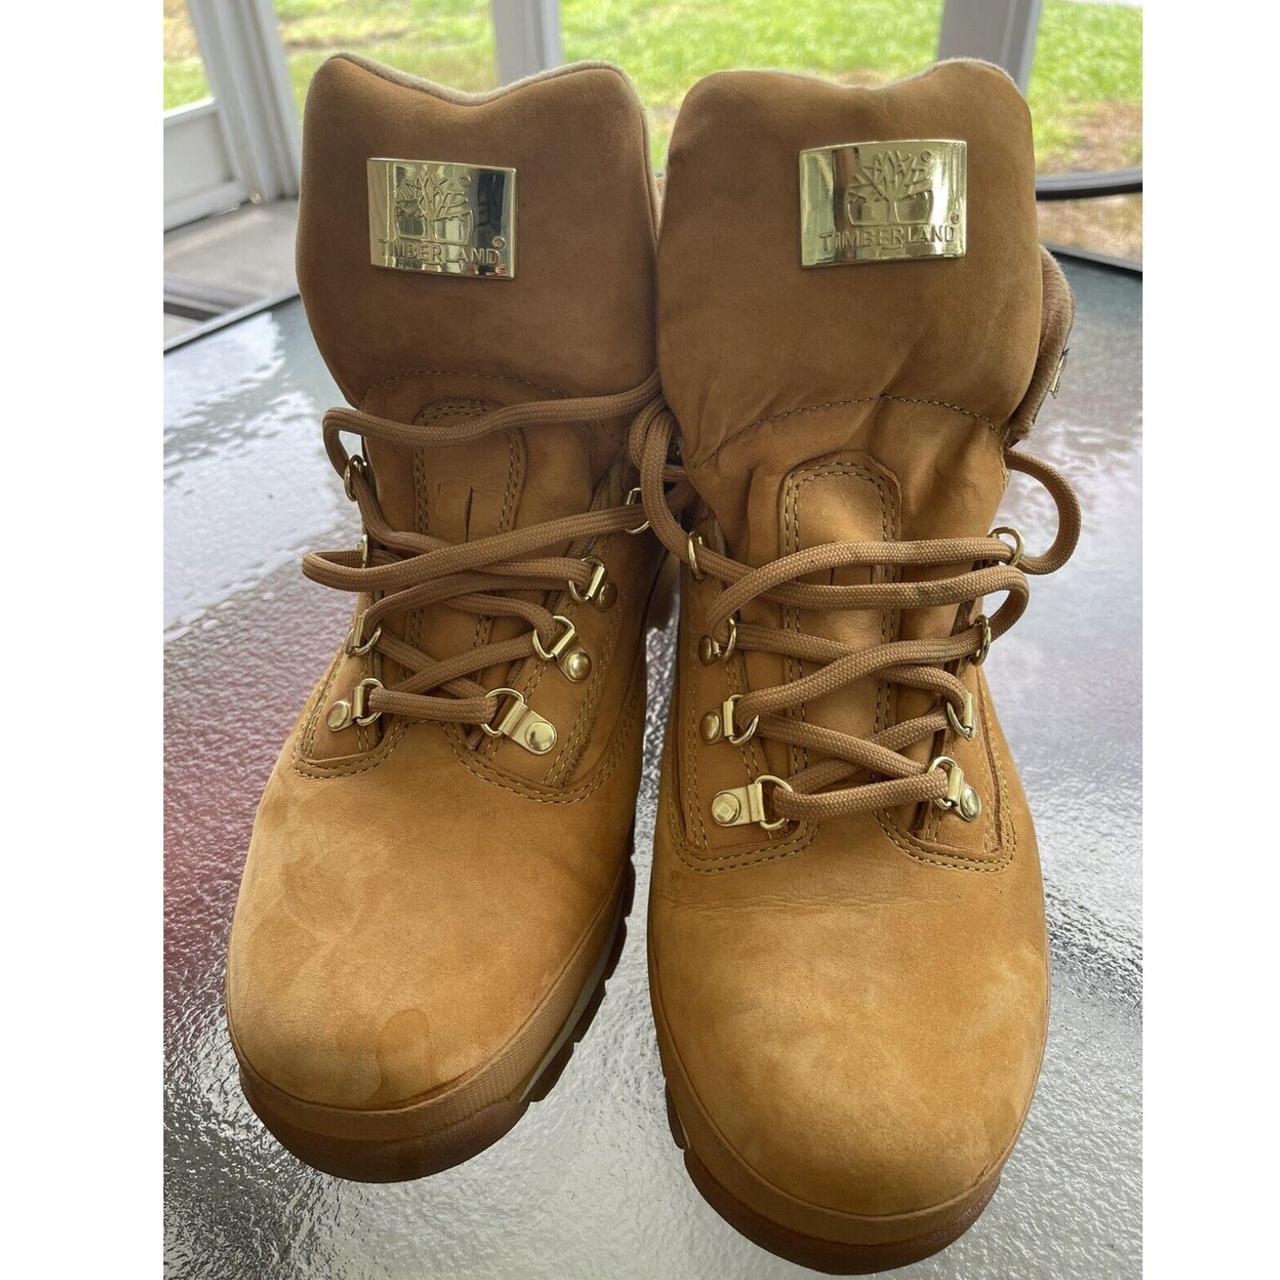 TIMBERLAND BOOT ANKLE HEIGHT WHEAT LEATHER FIELD... - Depop